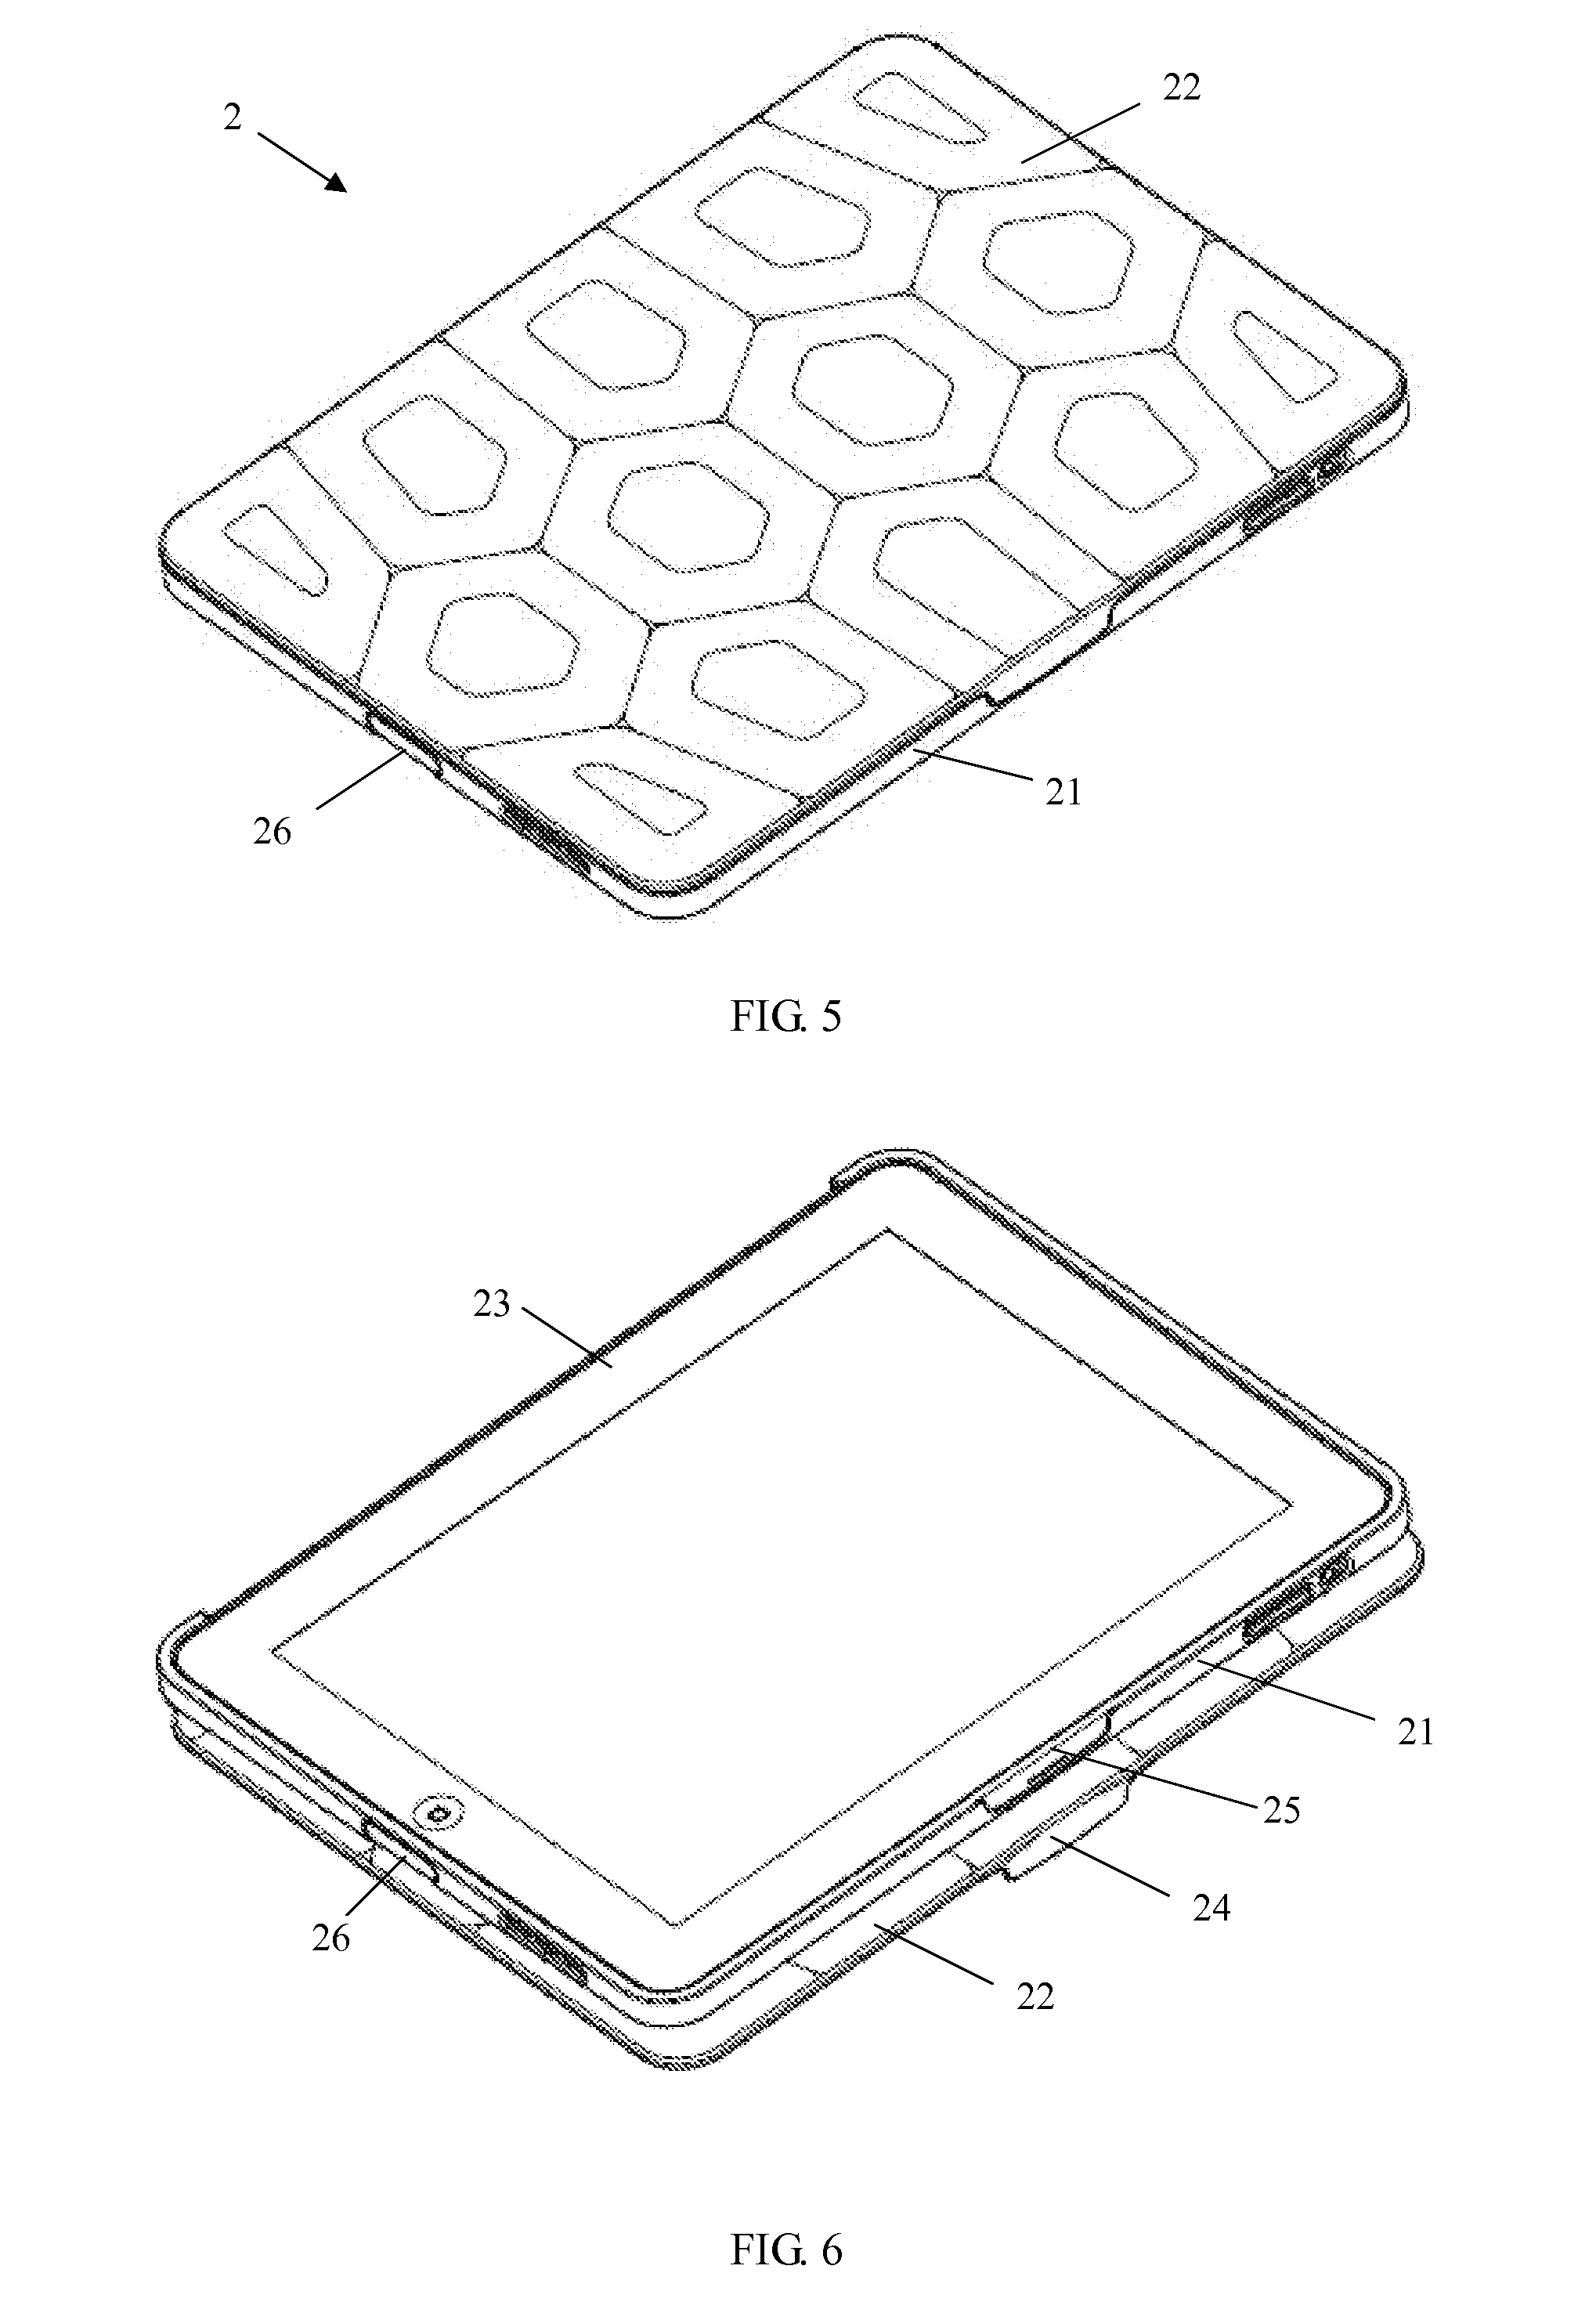 Combination of protective casing and stand for portable handheld electronic device